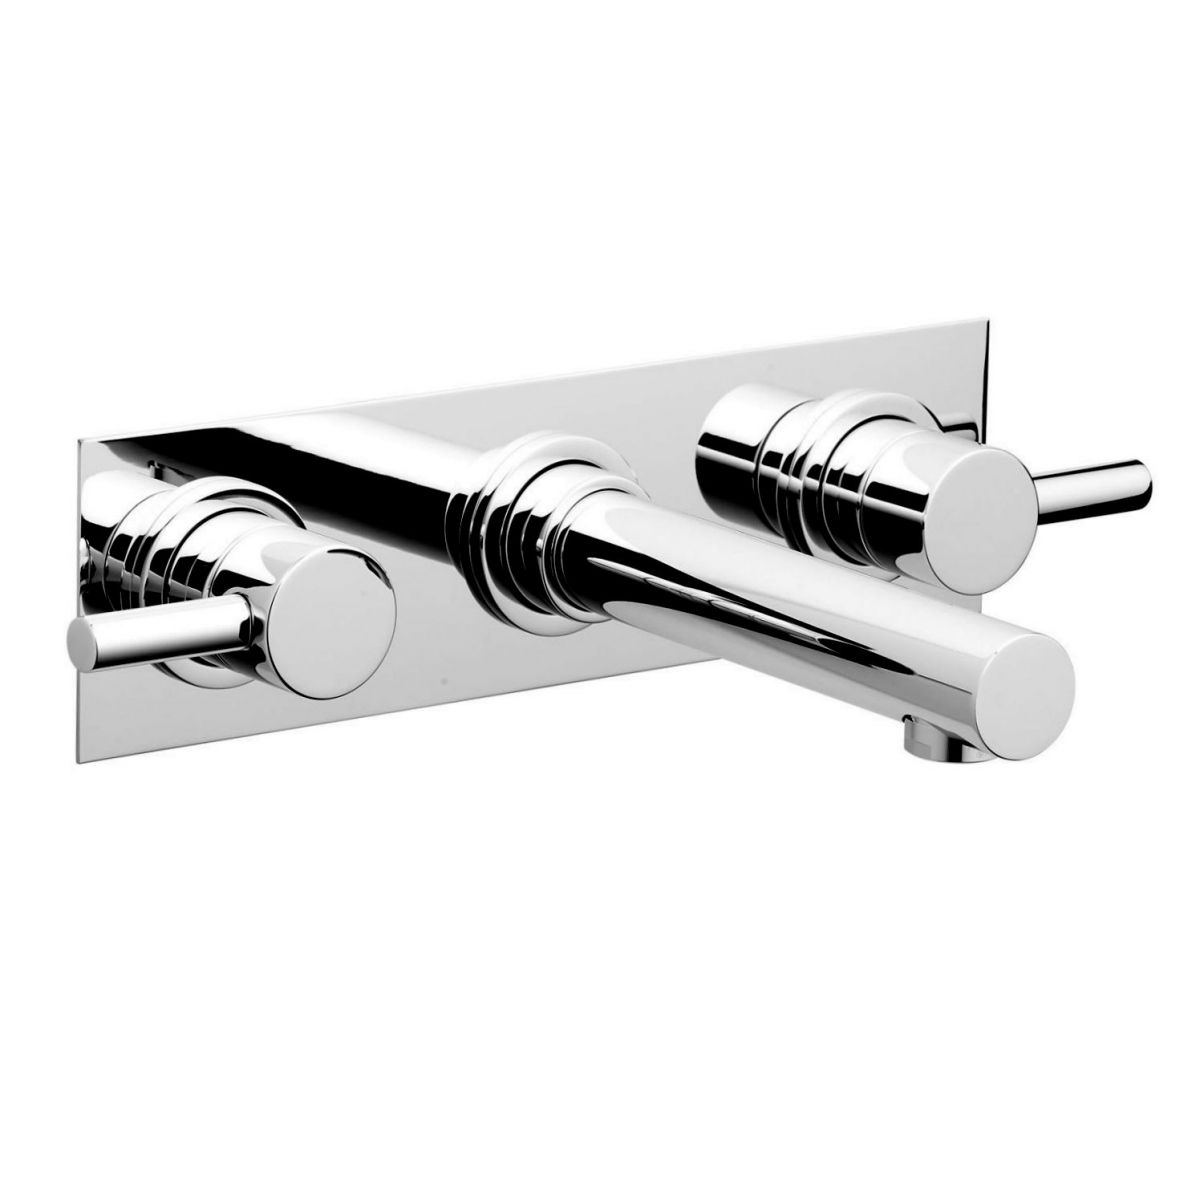 Swadling Absolute 3 Hole Wall Mounted Bath Tap